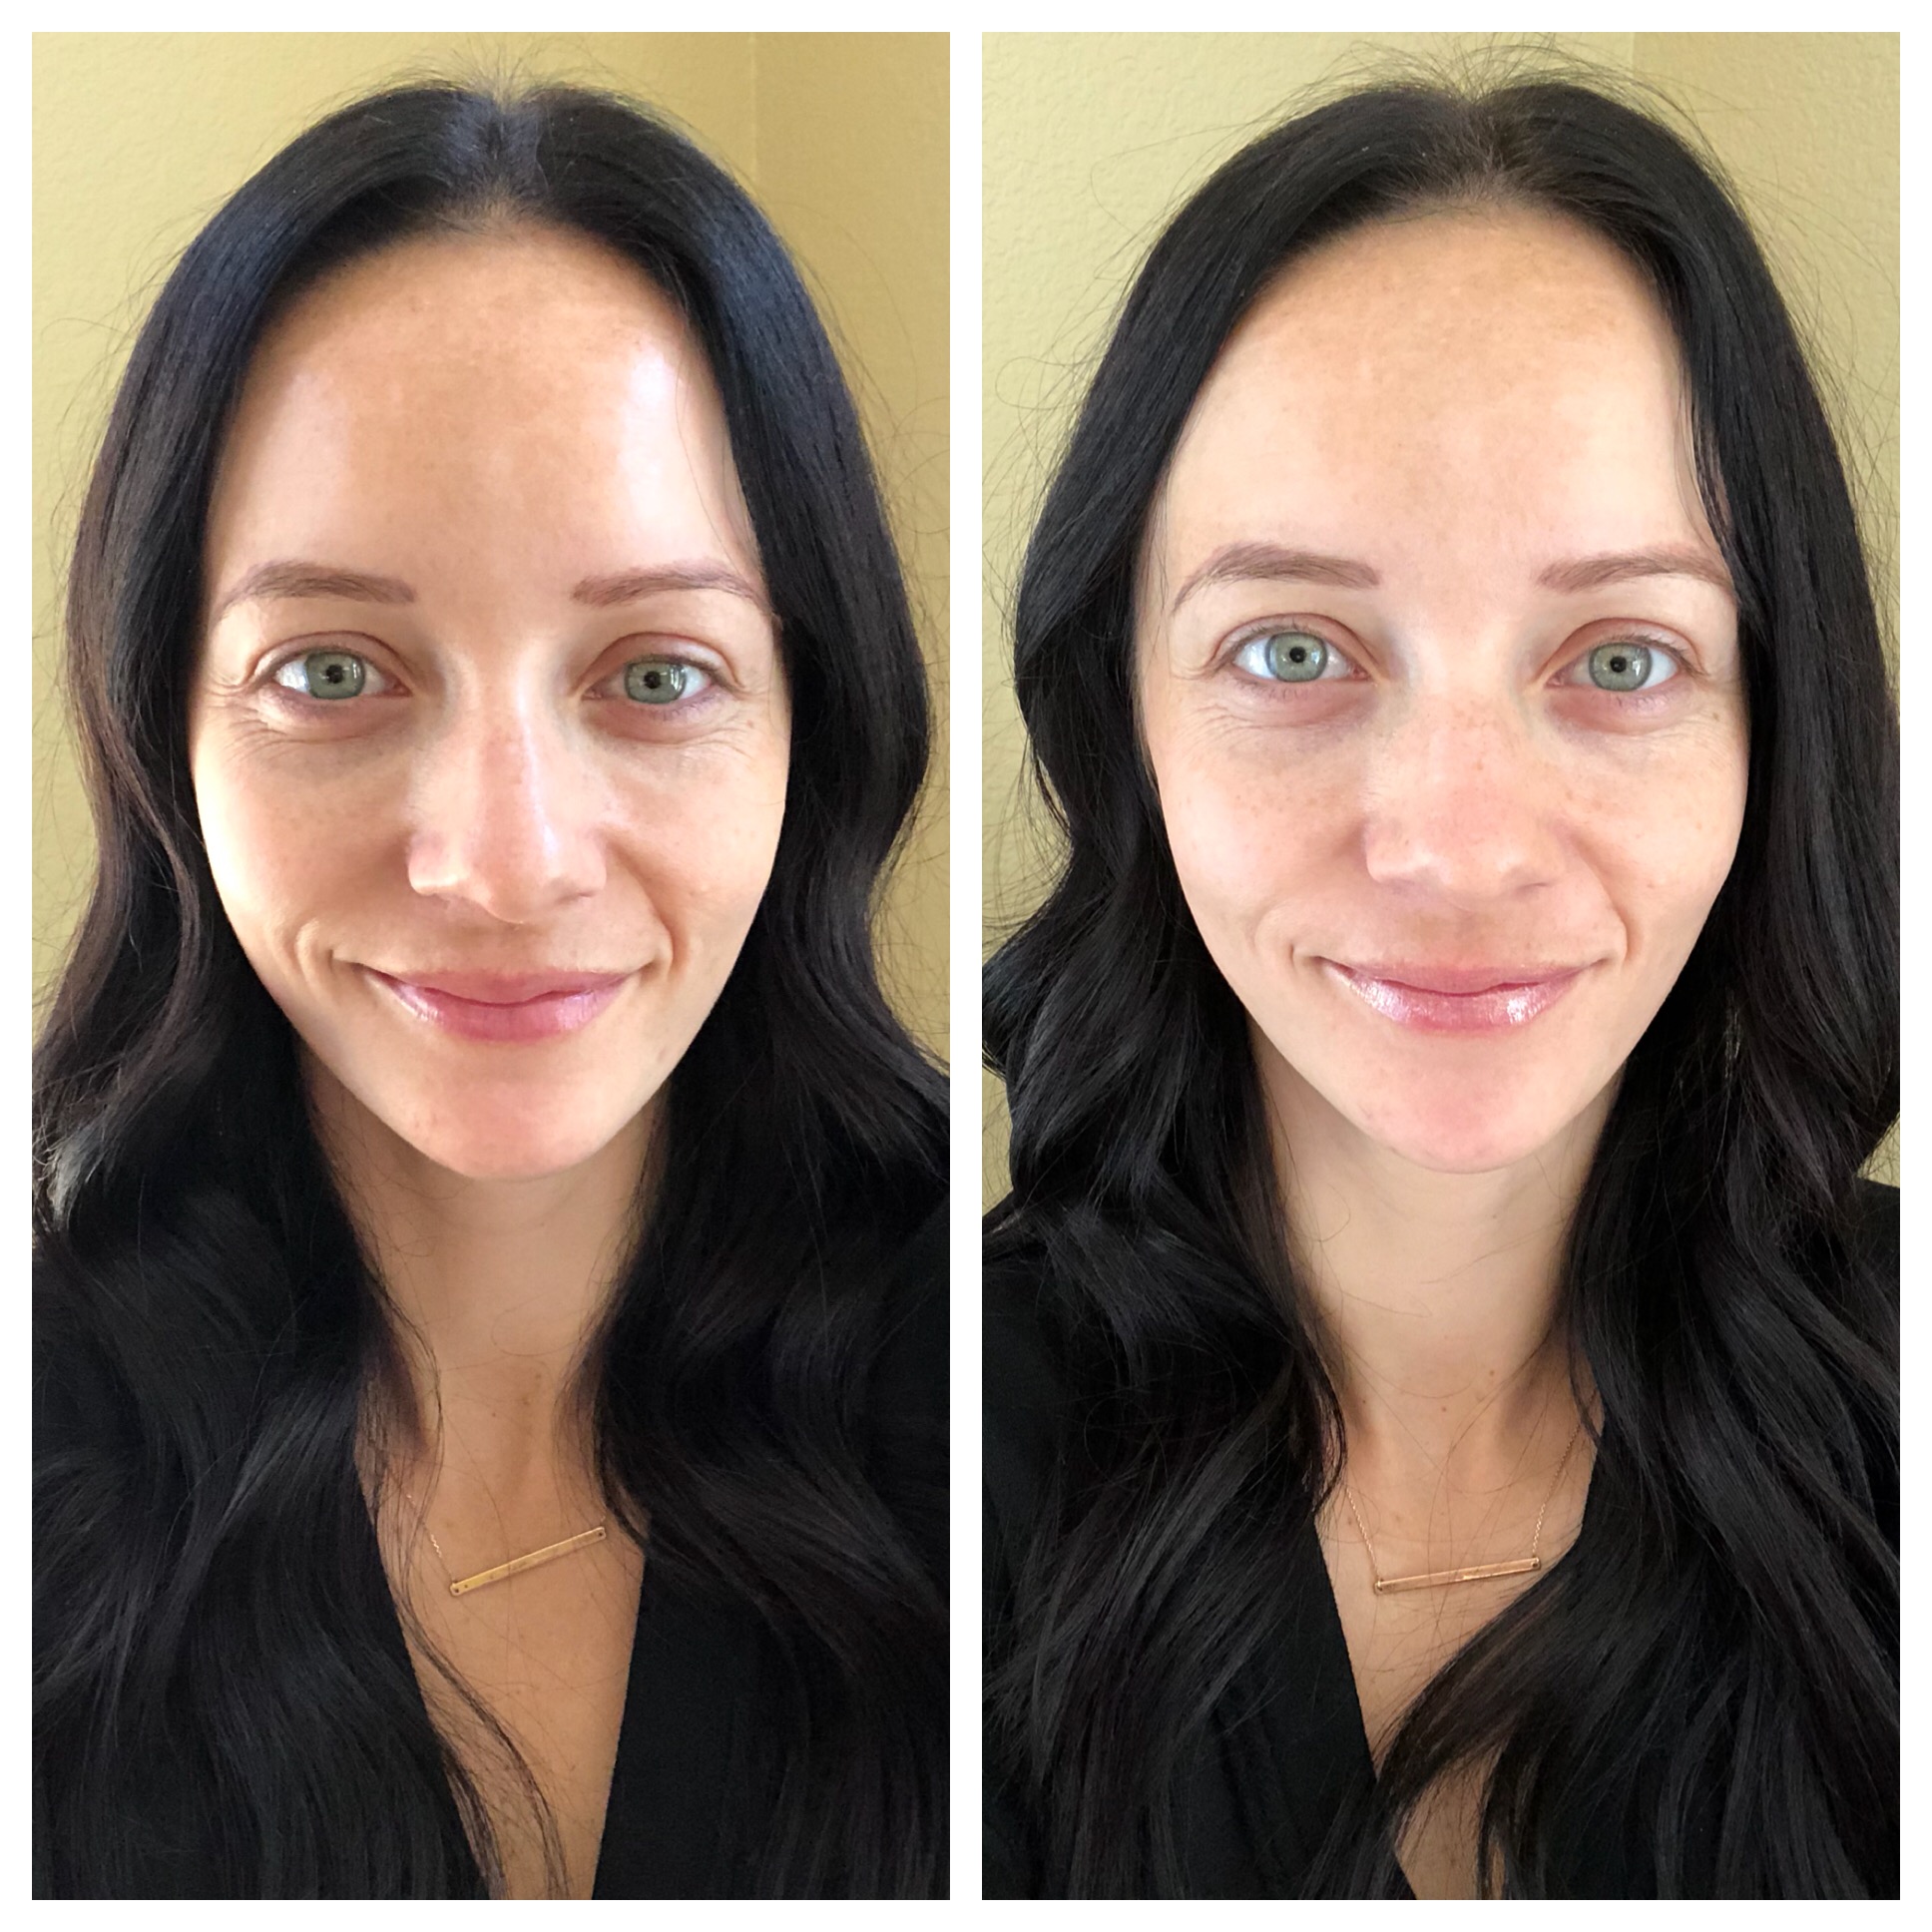 glytone chemical peel before and after featured by popular Las Vegas beauty blogger, Outfits & Outings